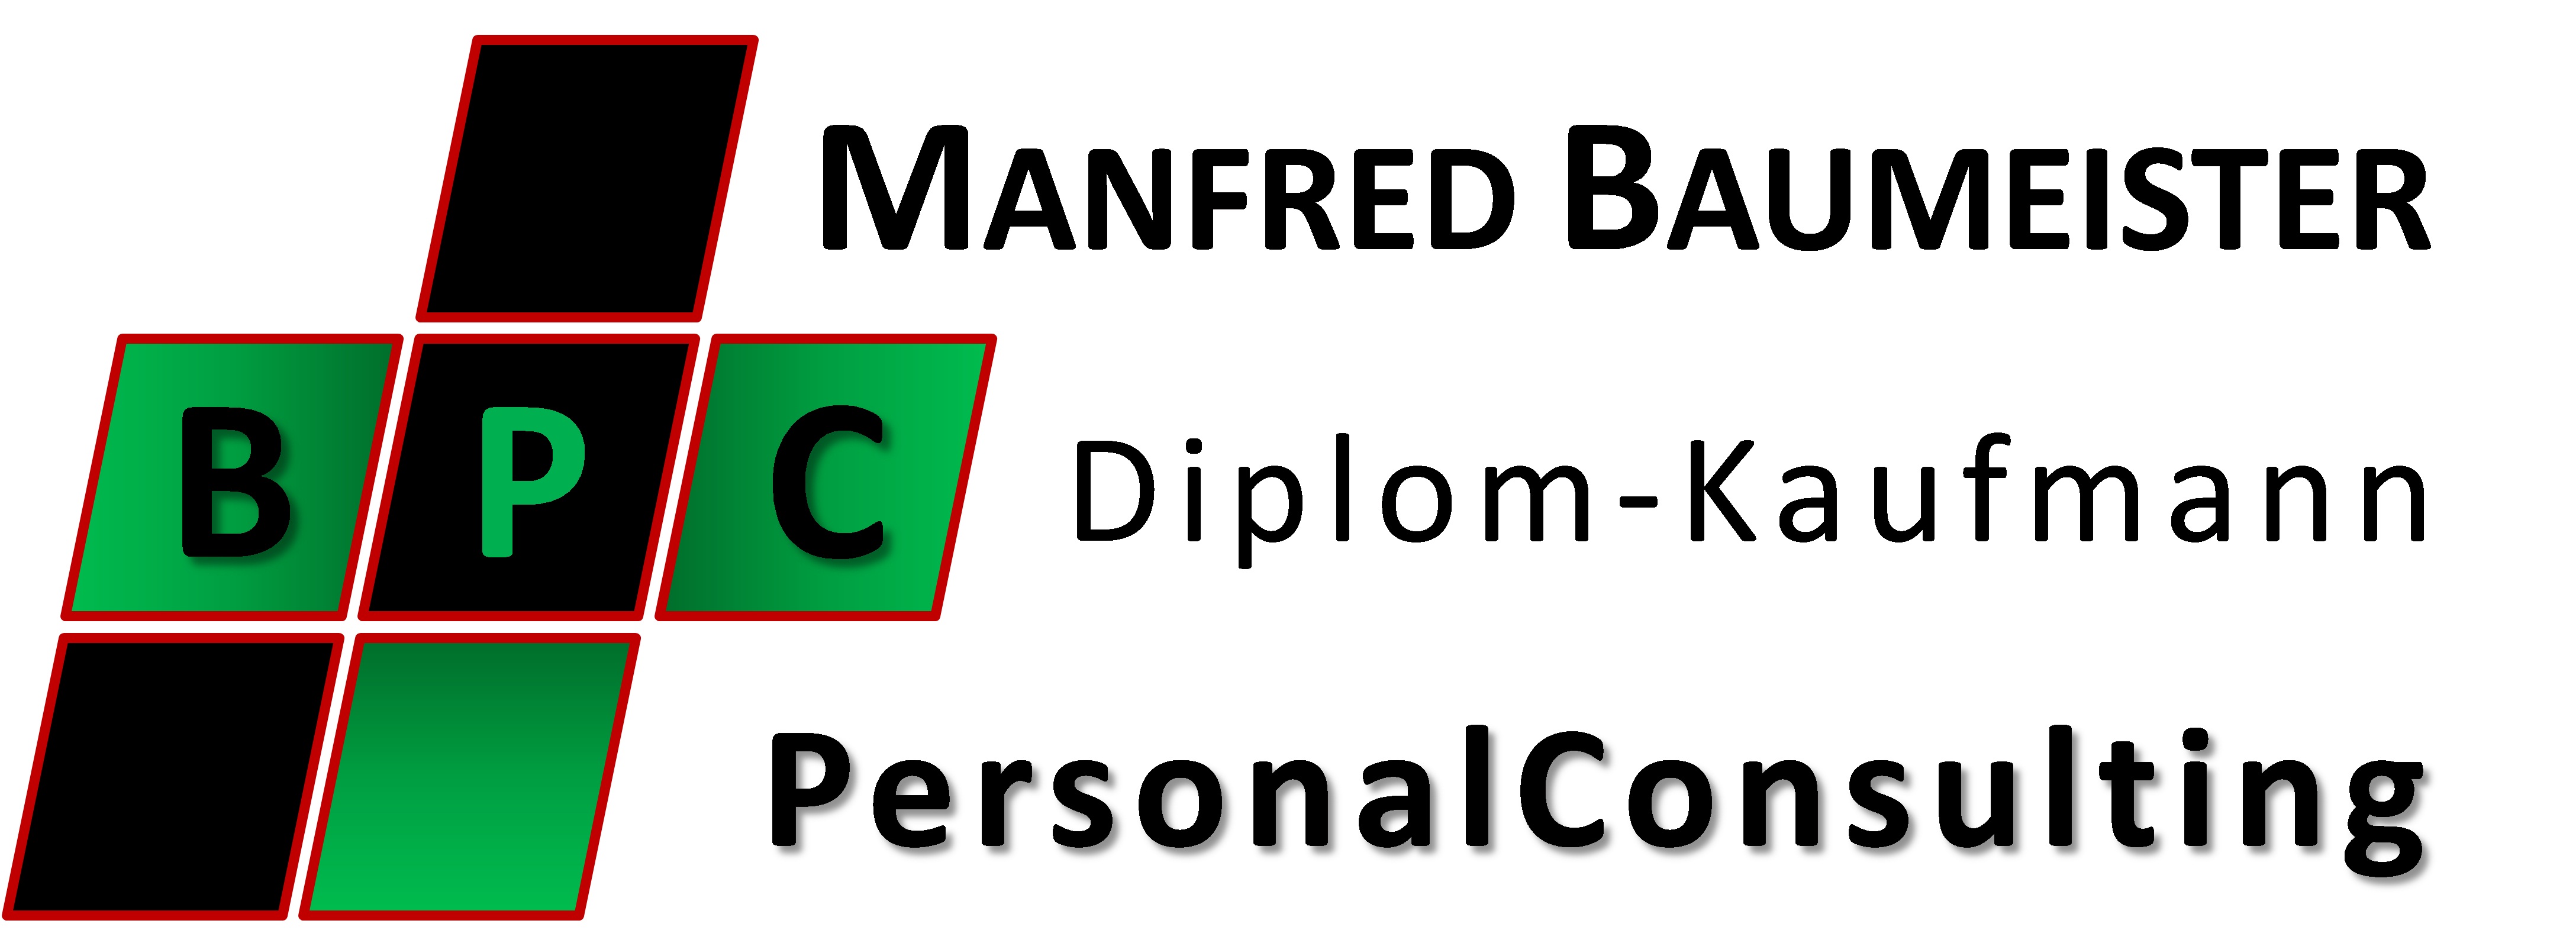 Bpc Dipl Kfm Manfred Baumeister Personalconsulting In Meckenheim